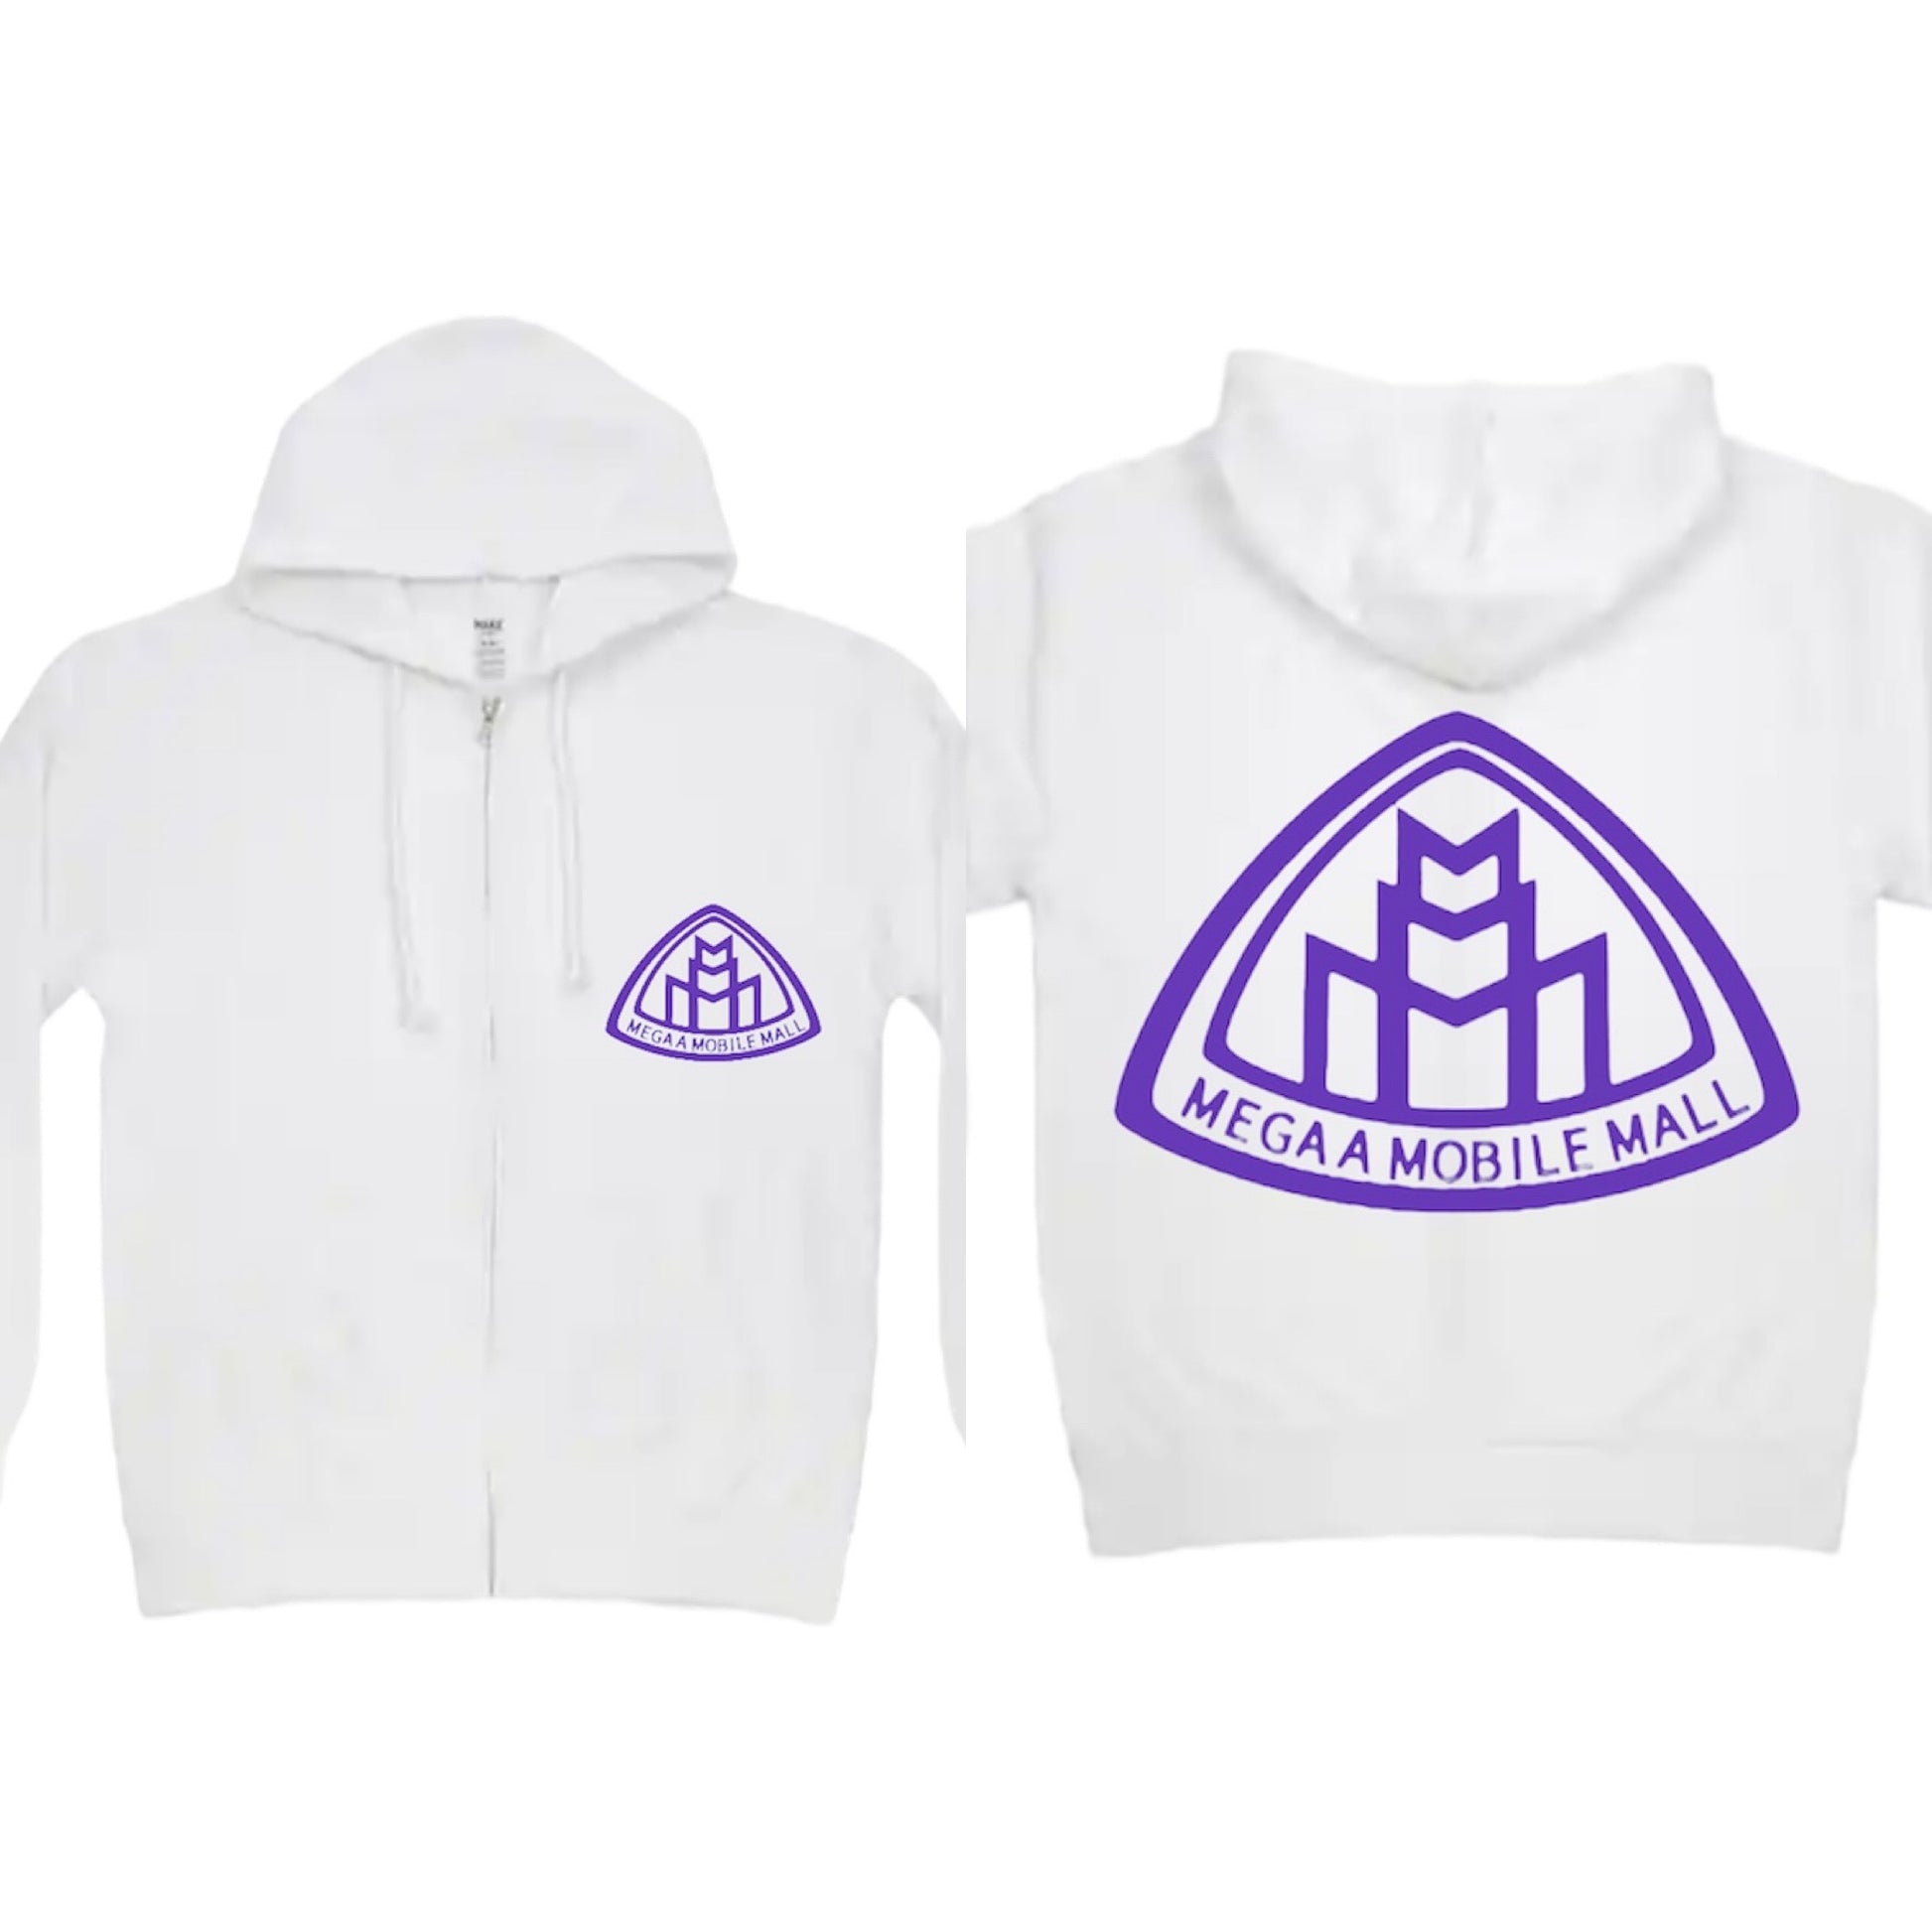 megaamobilemall white zip up hoodie with purple logo